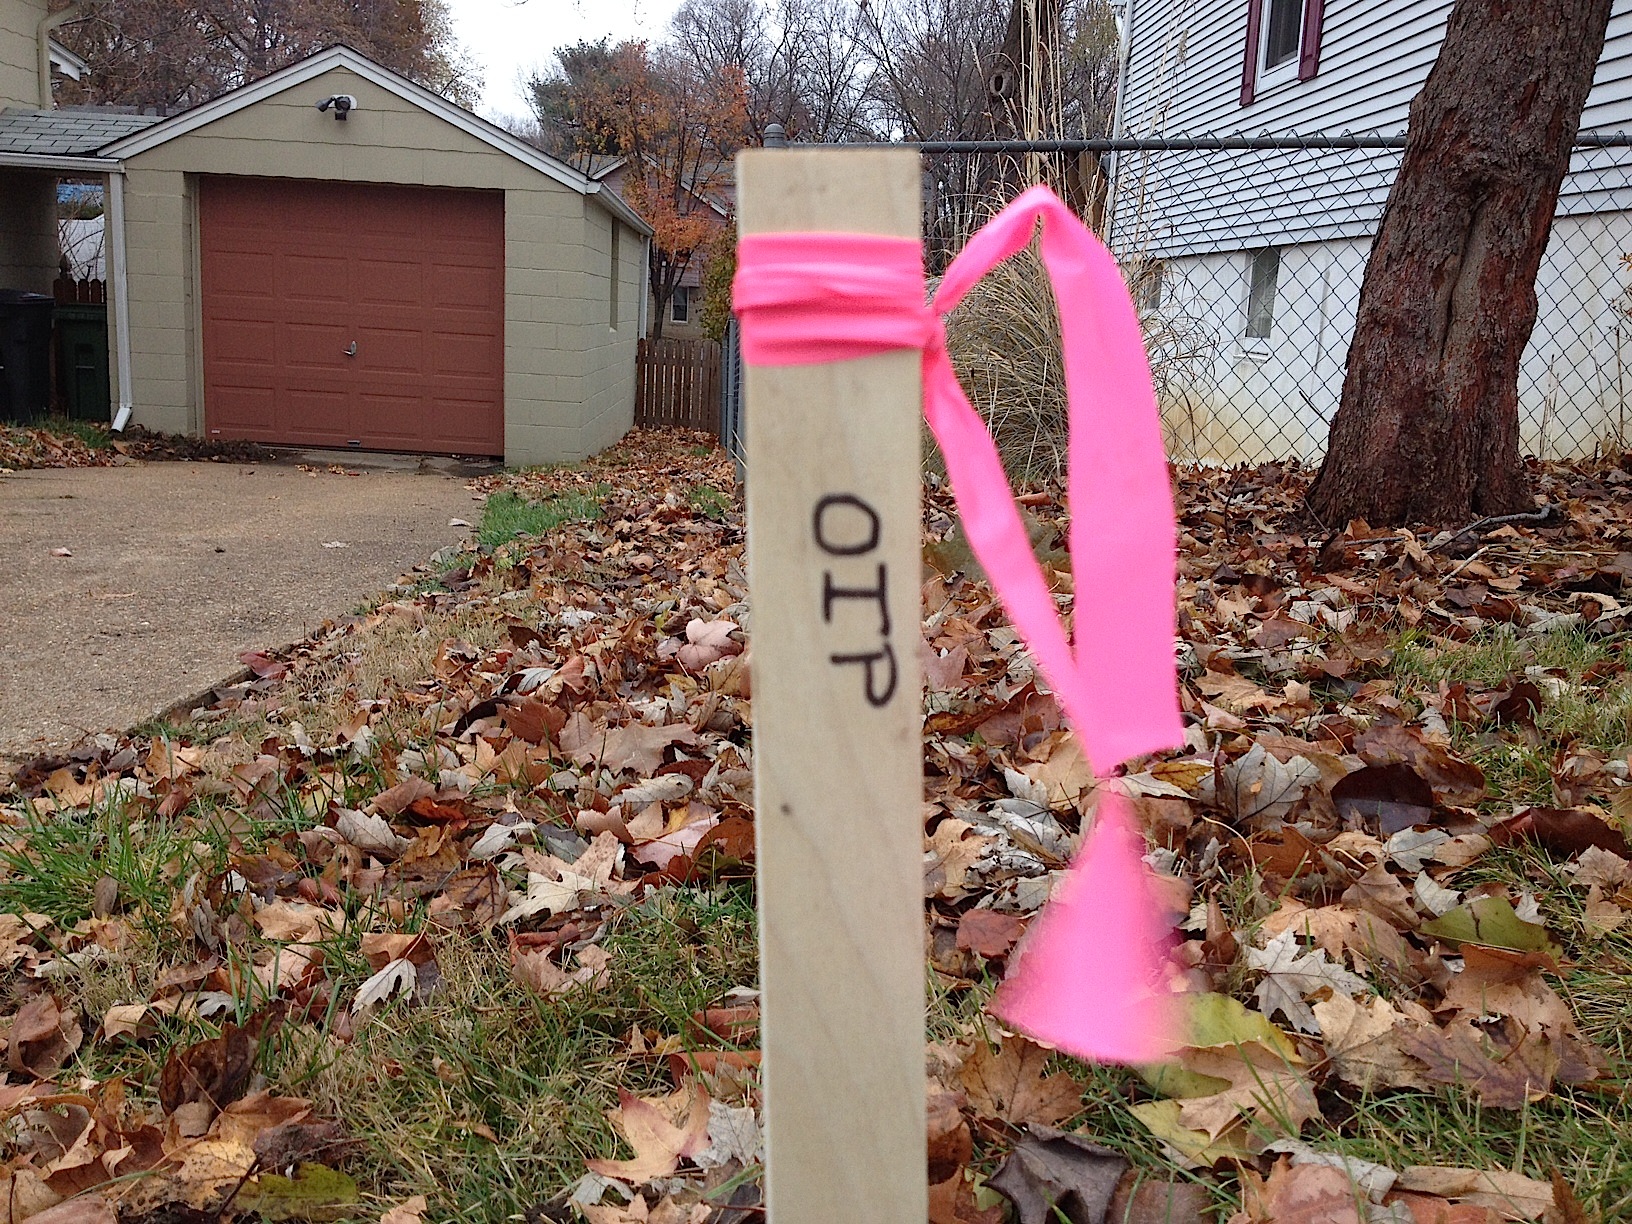 What does O.I.P. on a stake mean? Some showed up on Laclede Station Road